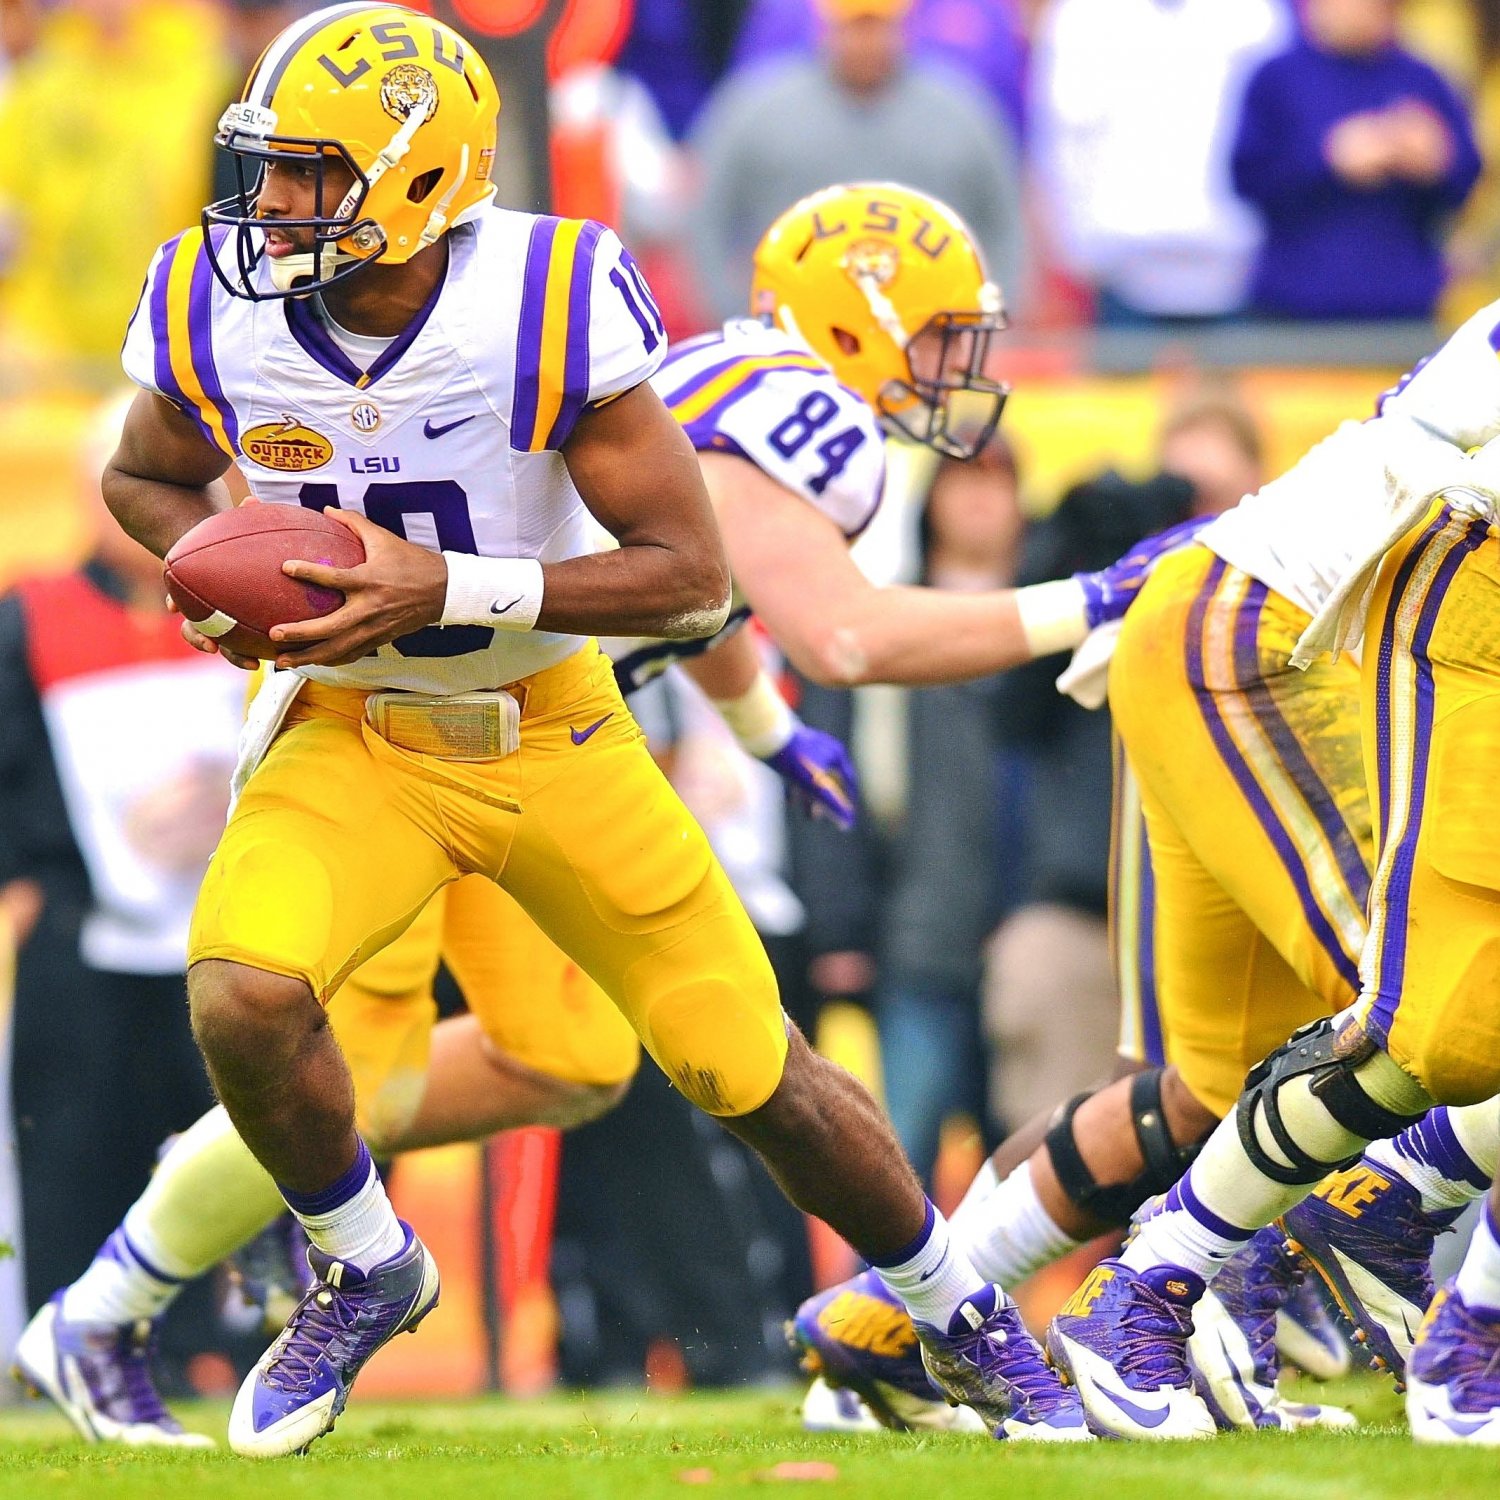 LSU Spring Game 2014: Live Score, Top Performers and Analysis | Bleacher Report